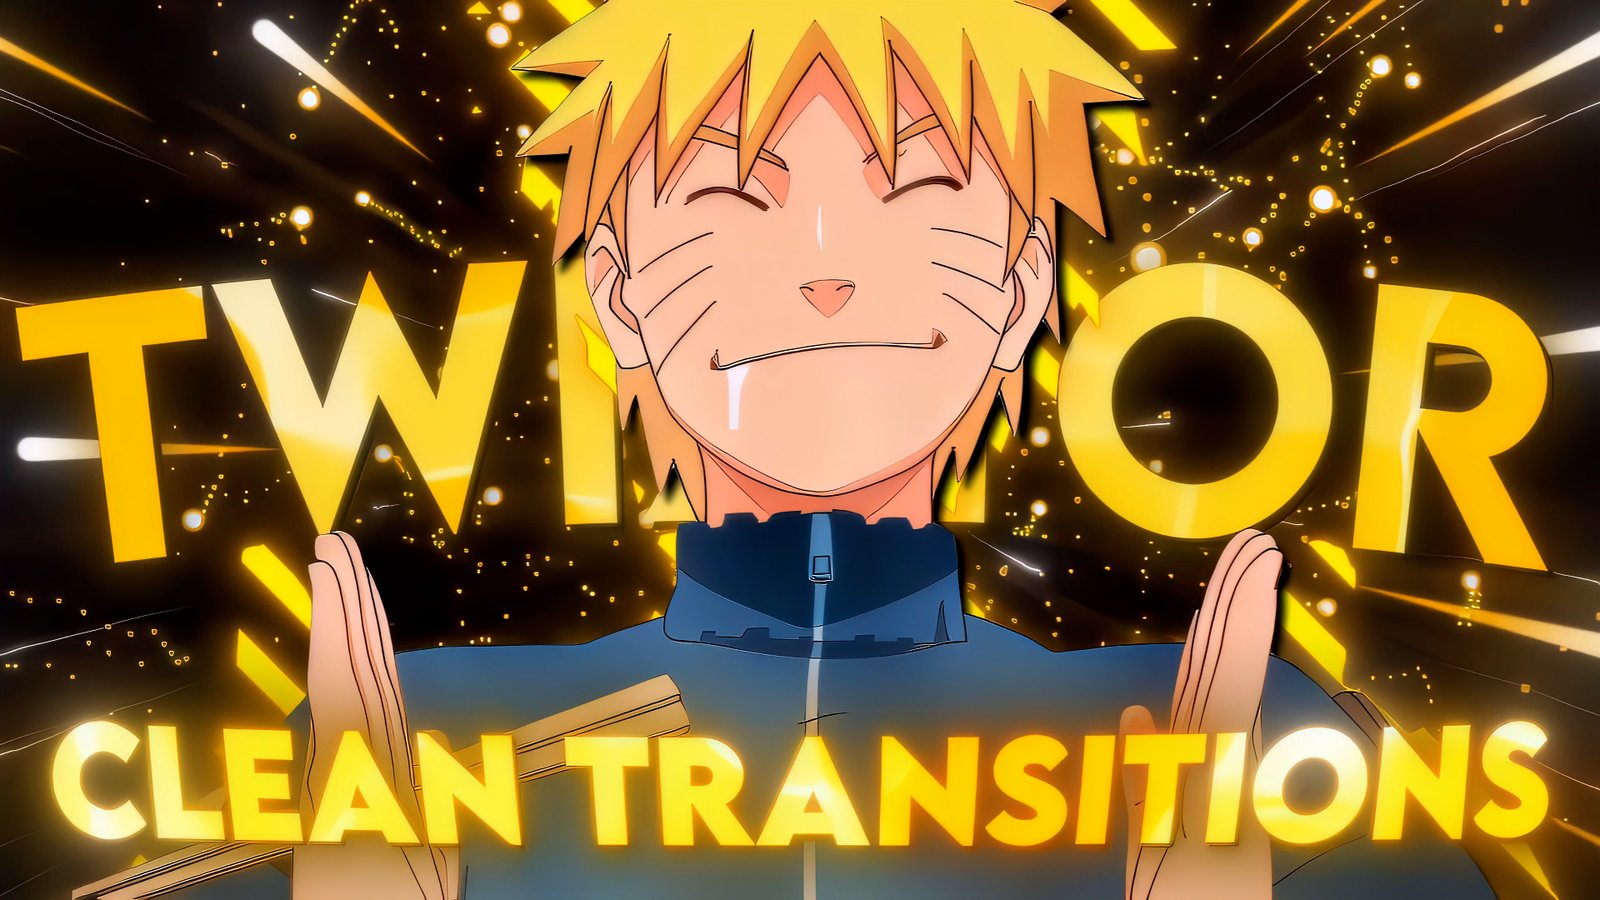 Anime Clean Transition Twixtor